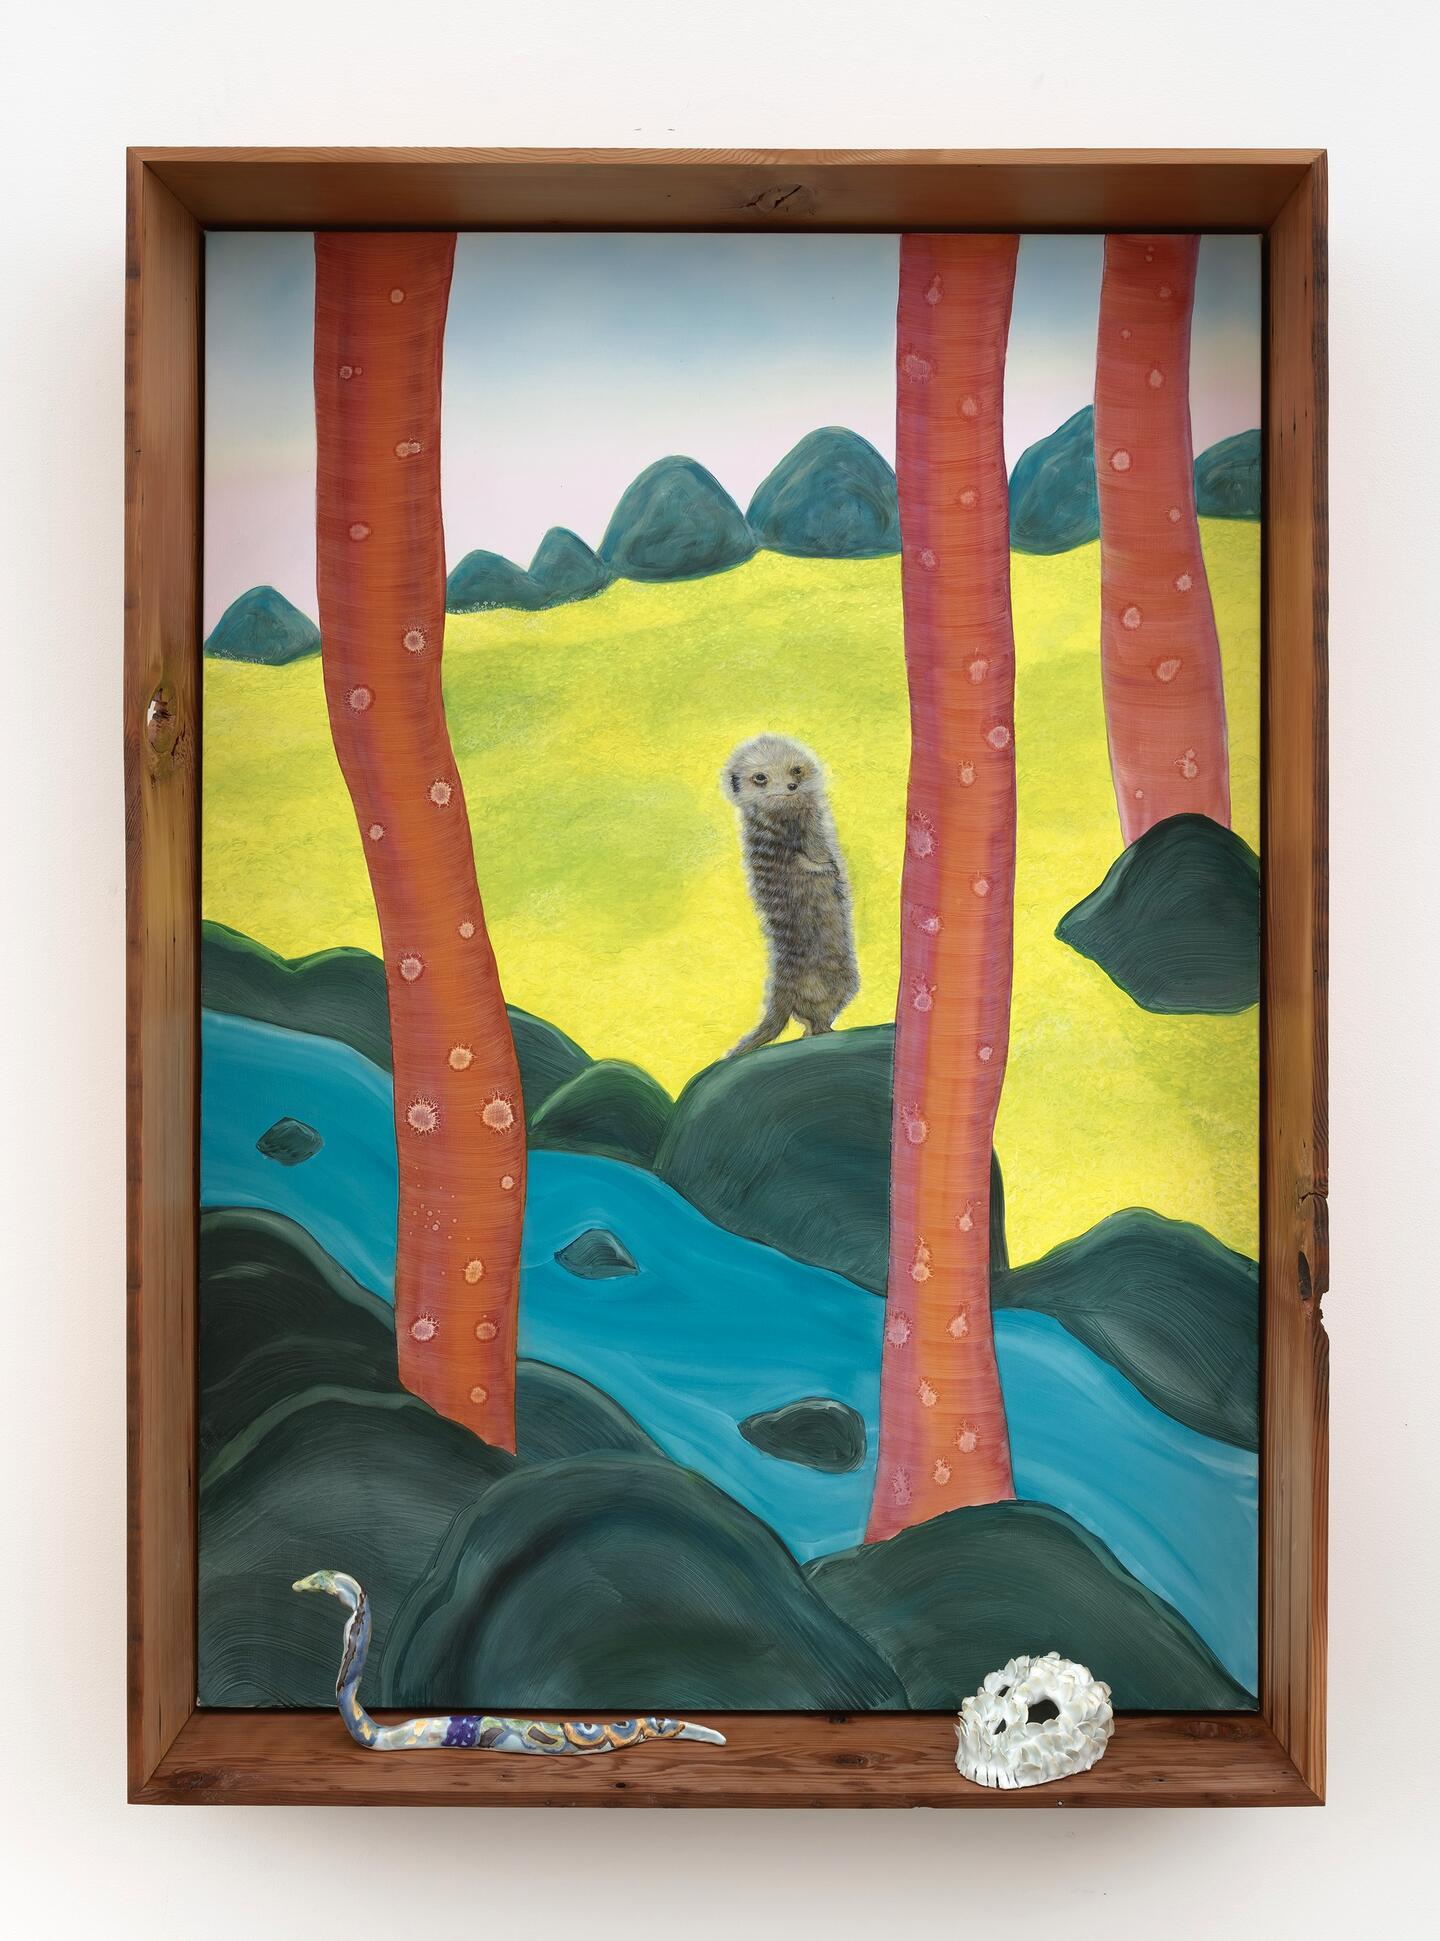 Painting of a mongoose with a porcelain snake and skull